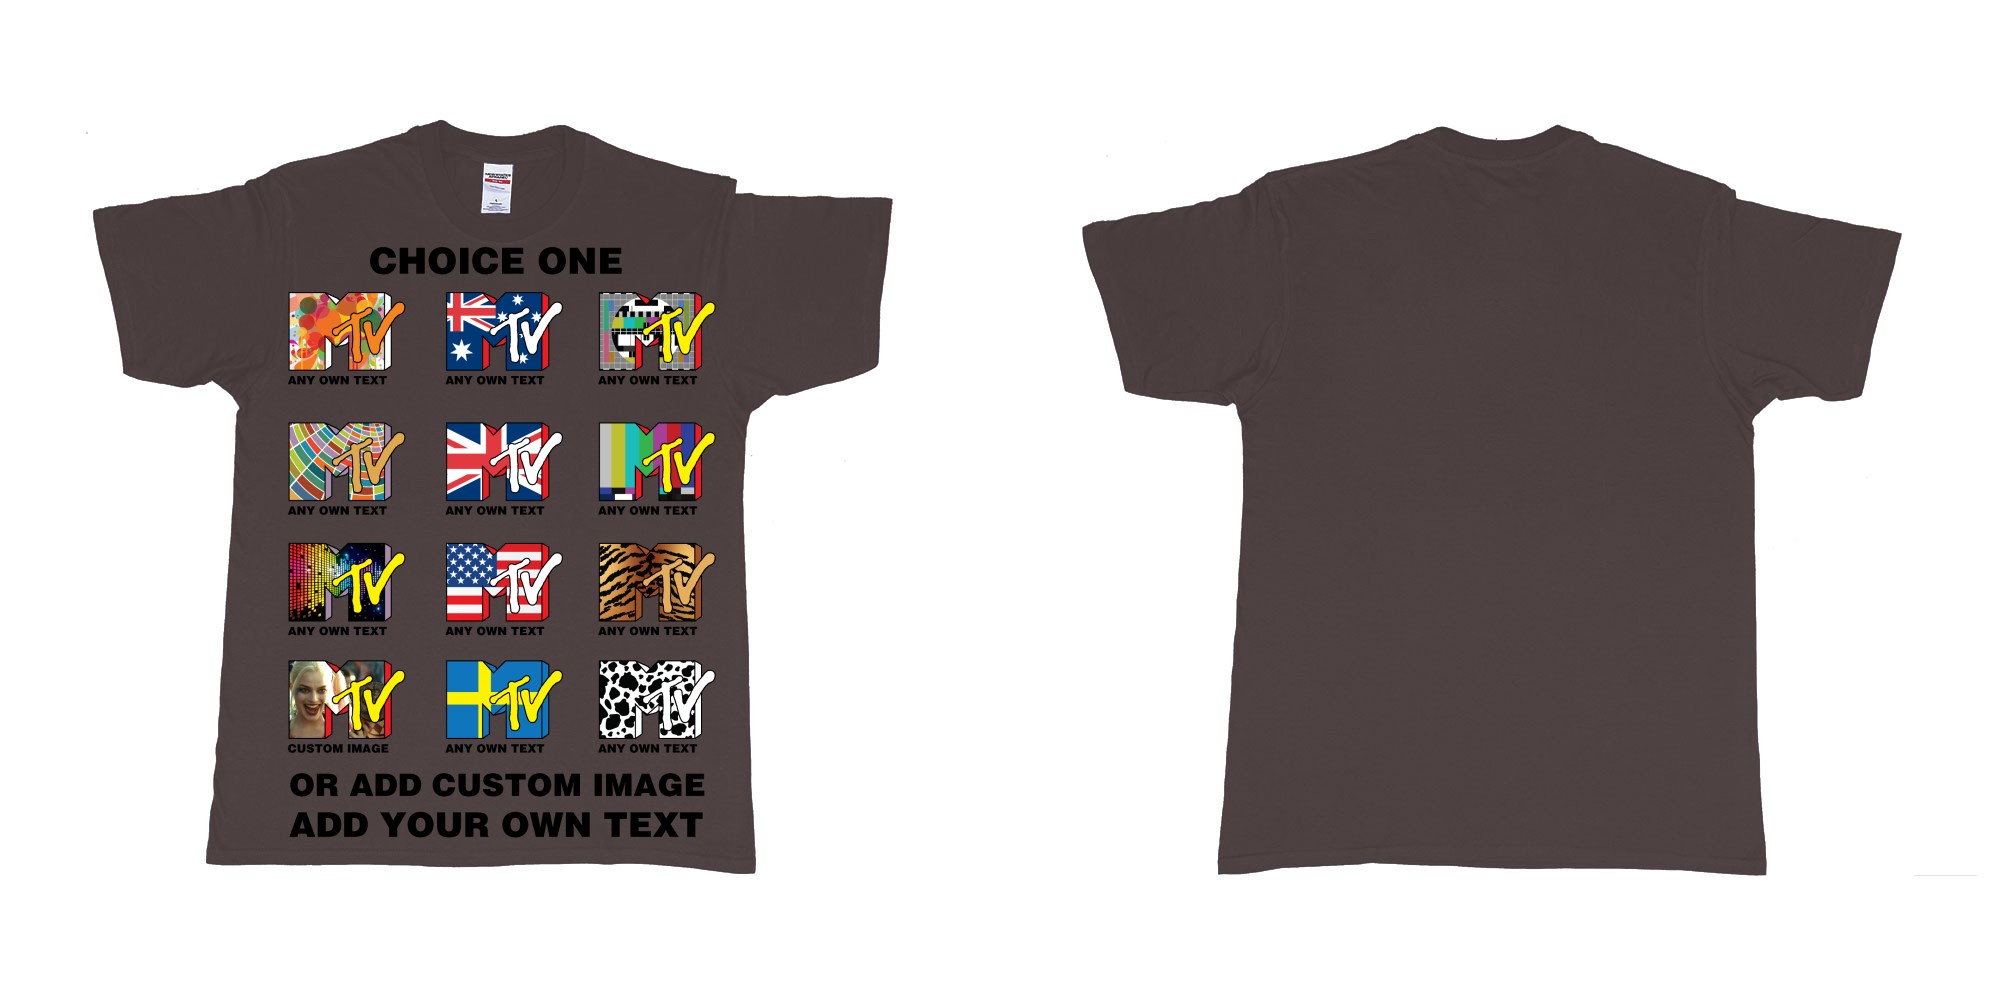 Custom tshirt design mtv logo choice any background text print in fabric color dark-chocolate choice your own text made in Bali by The Pirate Way